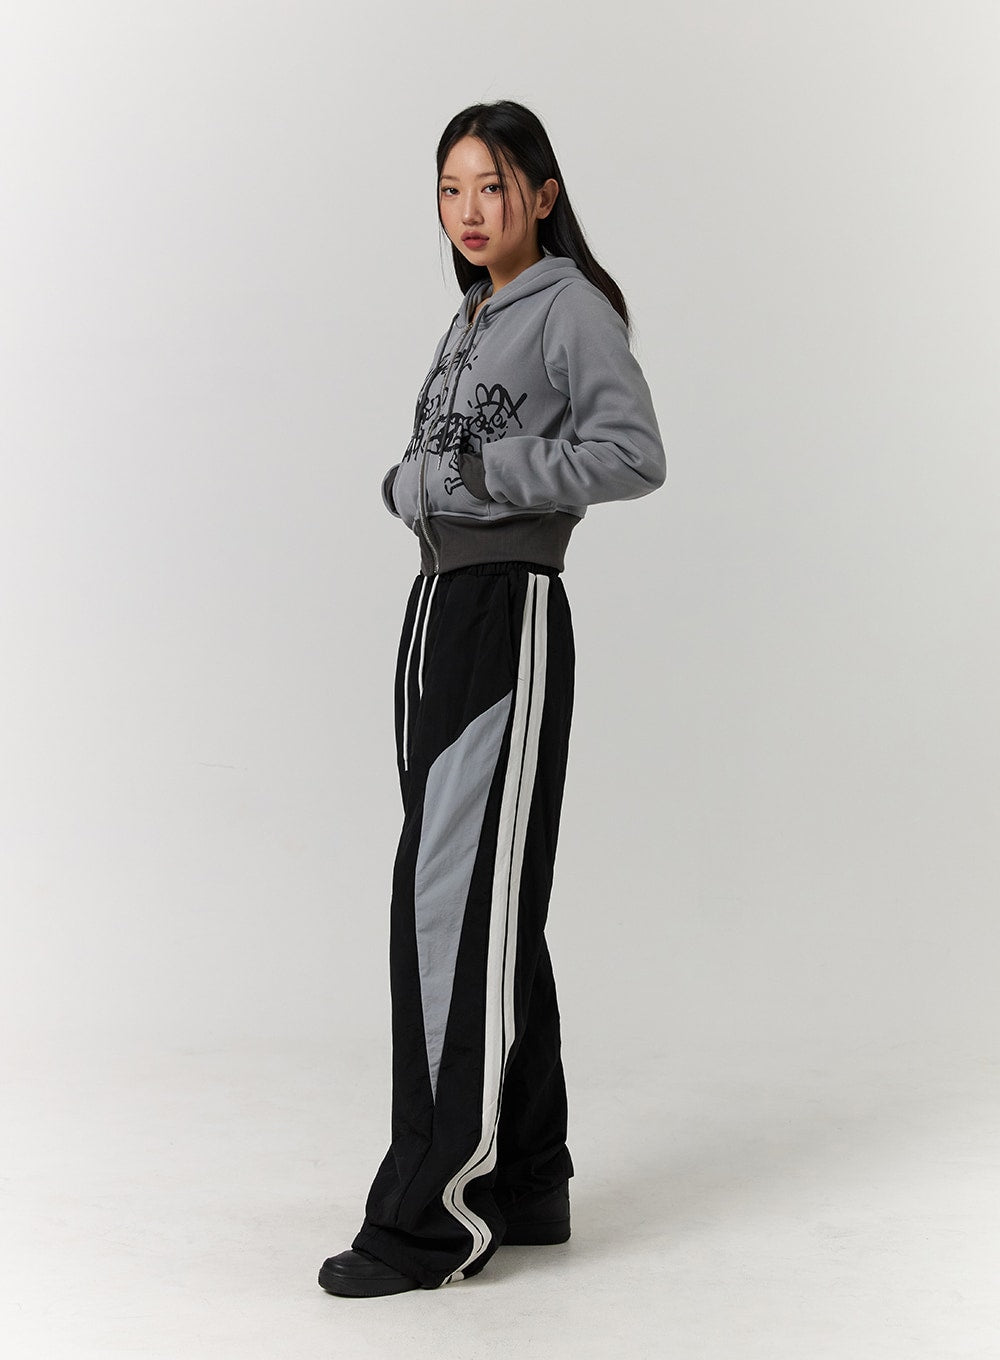 Buy track pants in black color for women at